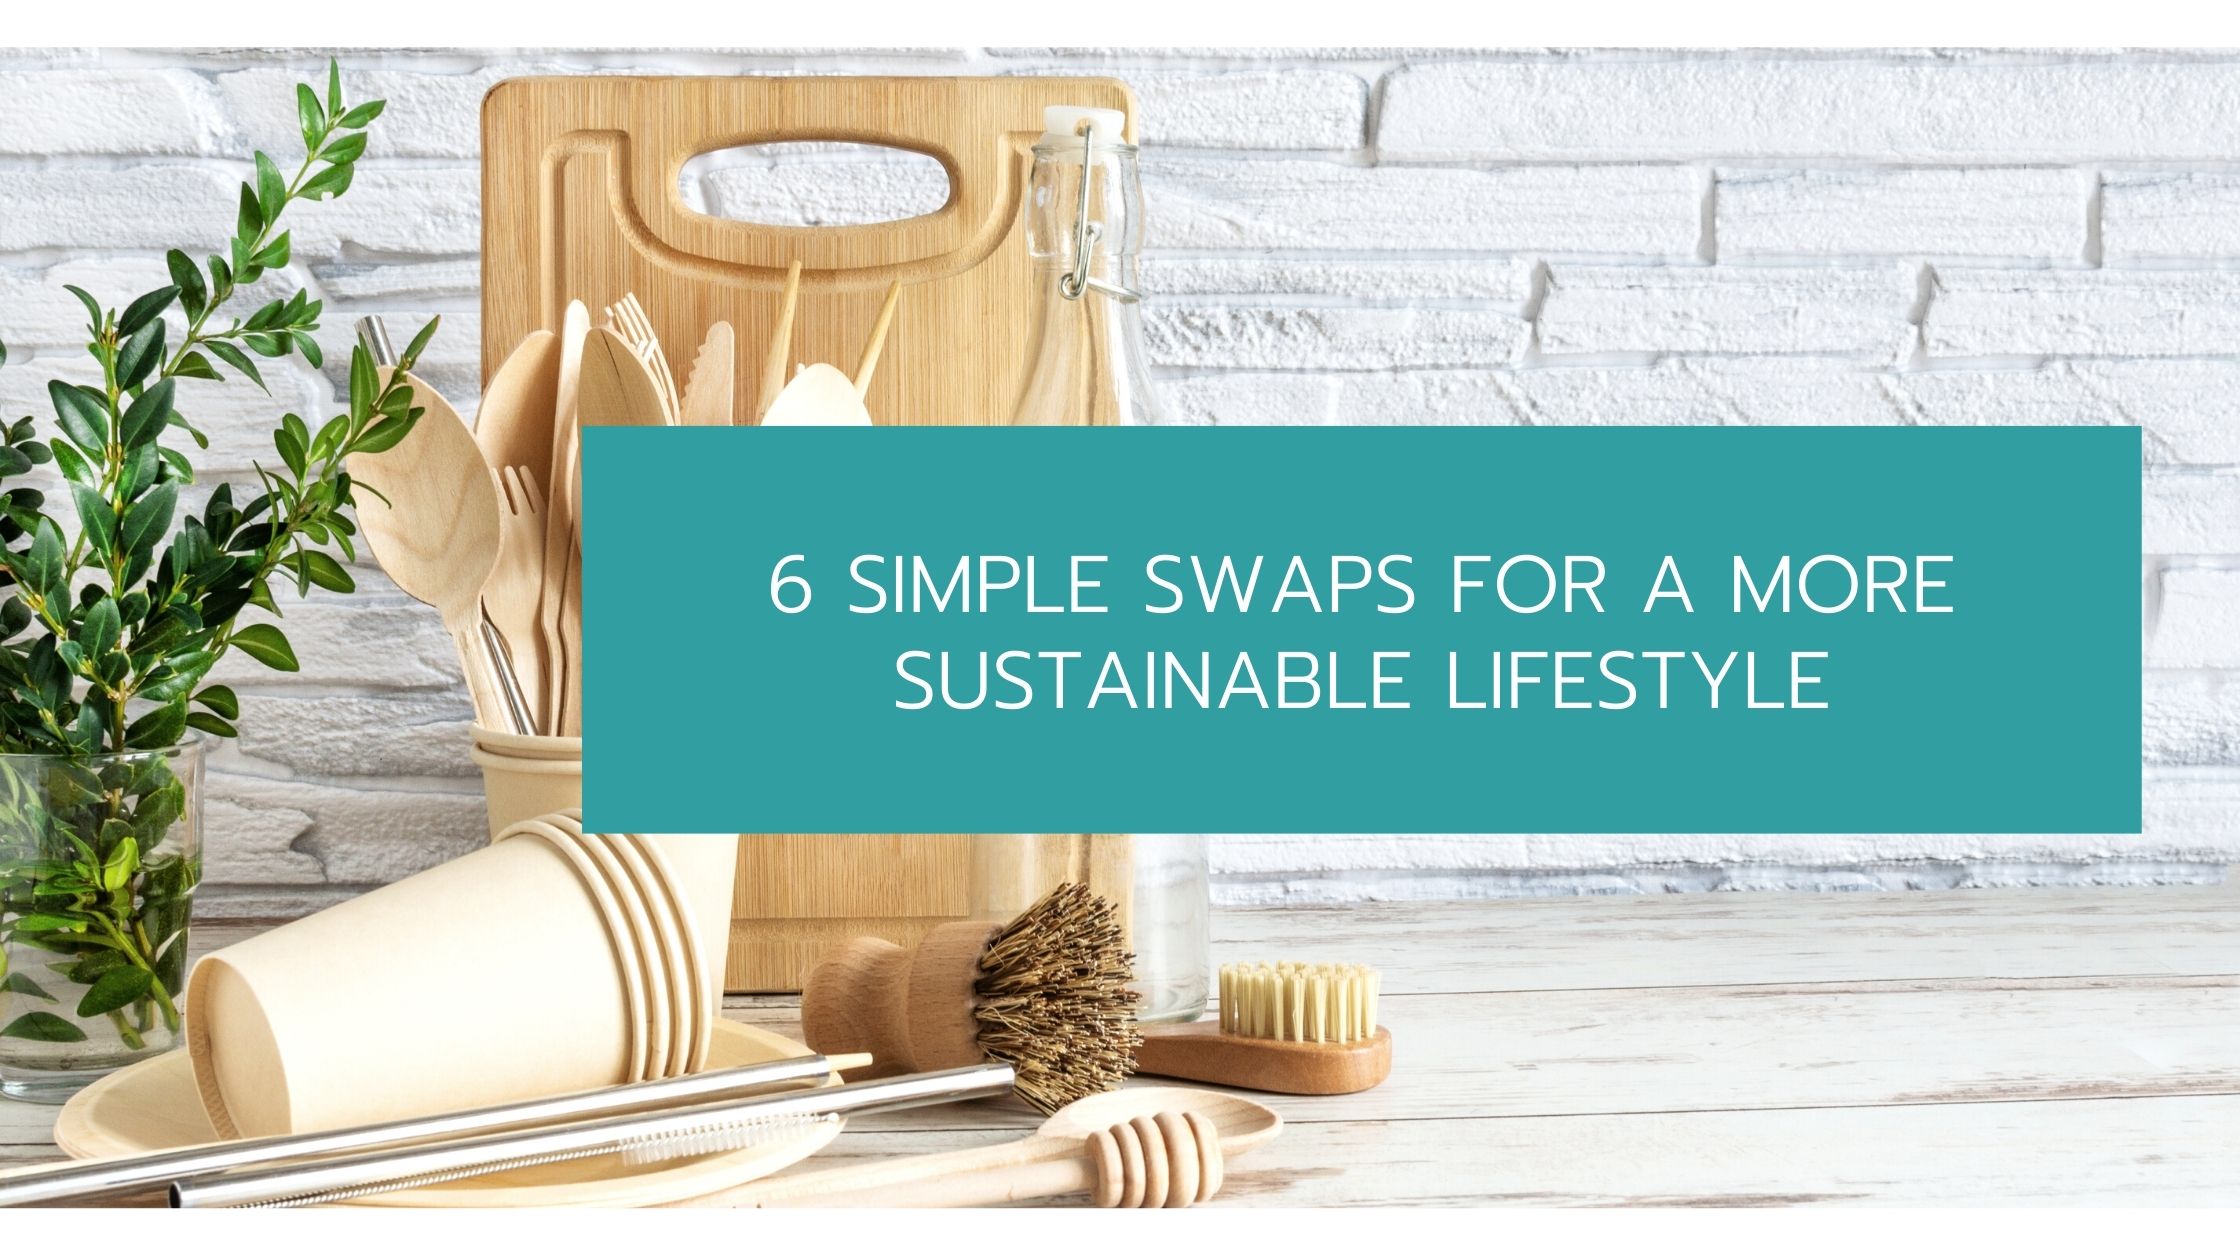 6 Simple Swaps for A More Sustainable Lifestyle